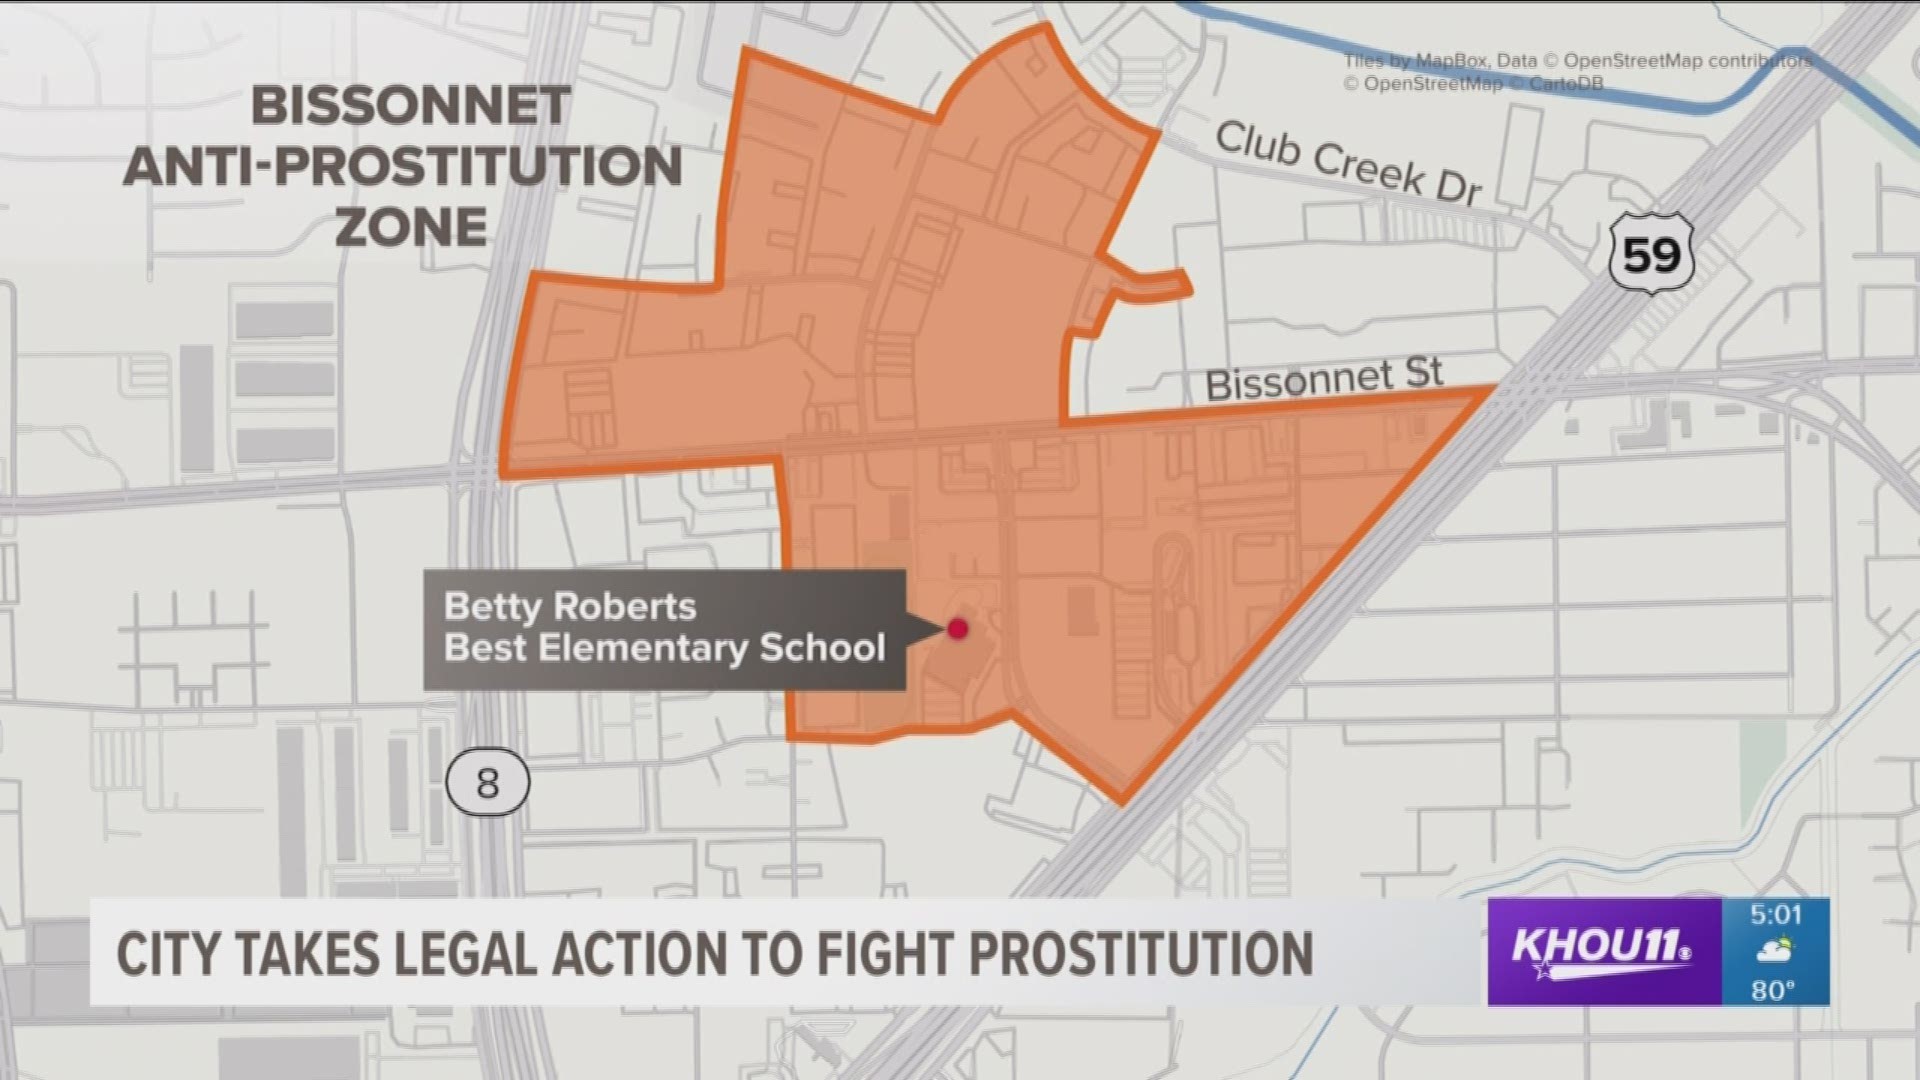 Houston and Harris County officials are fighting back against the sale of sex and human trafficking with an anti-prostitution lawsuit targeting the area known as Houston's Red Light District.